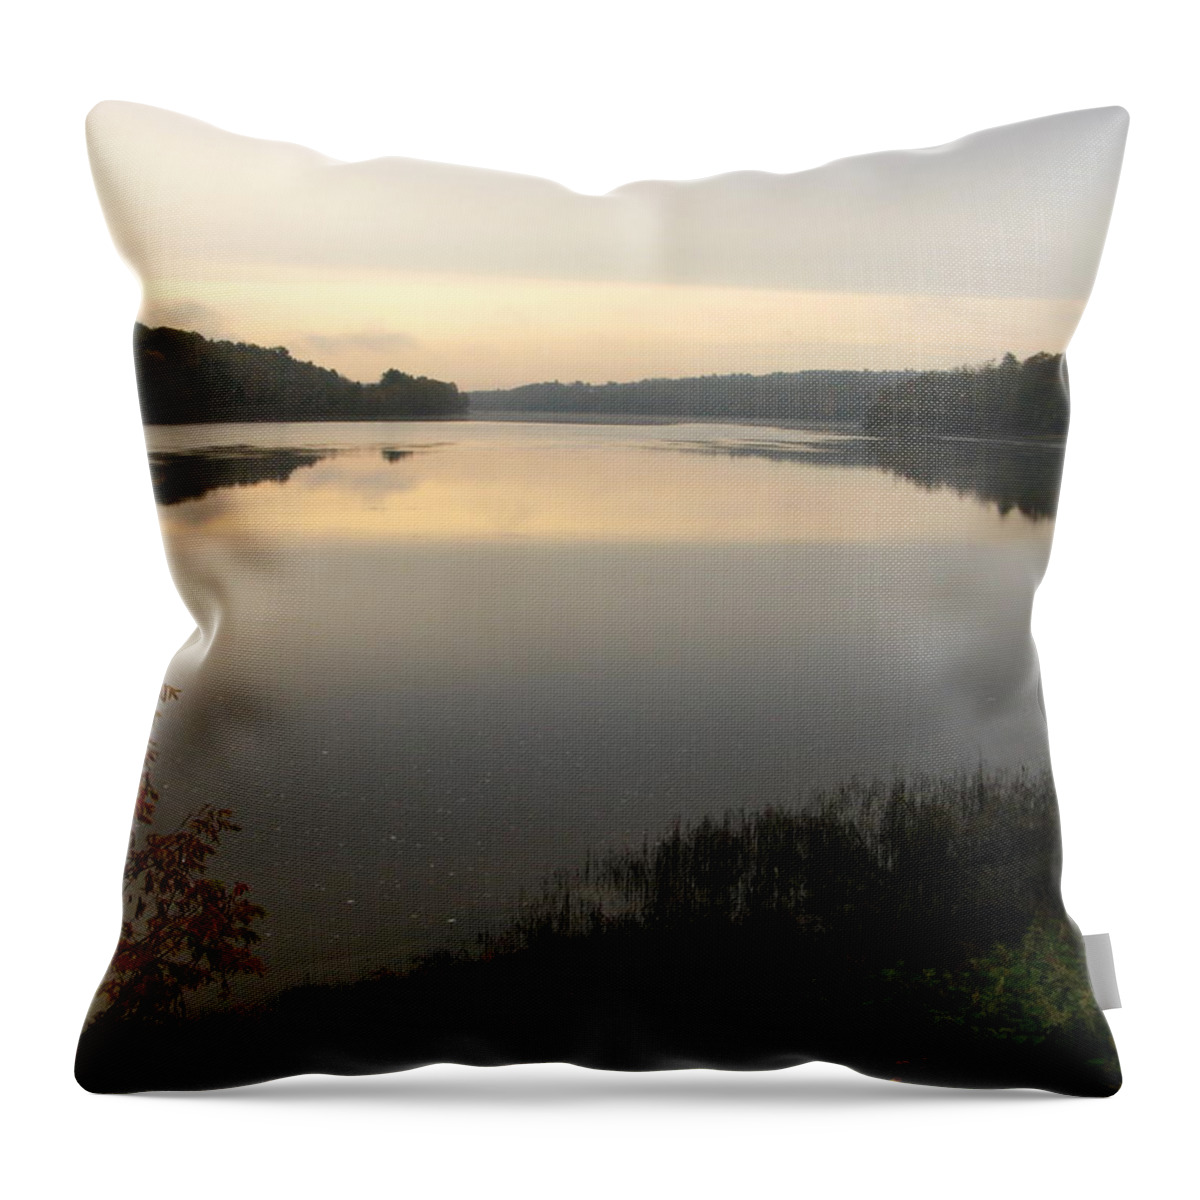 River Throw Pillow featuring the photograph River Solitude by Bill Tomsa